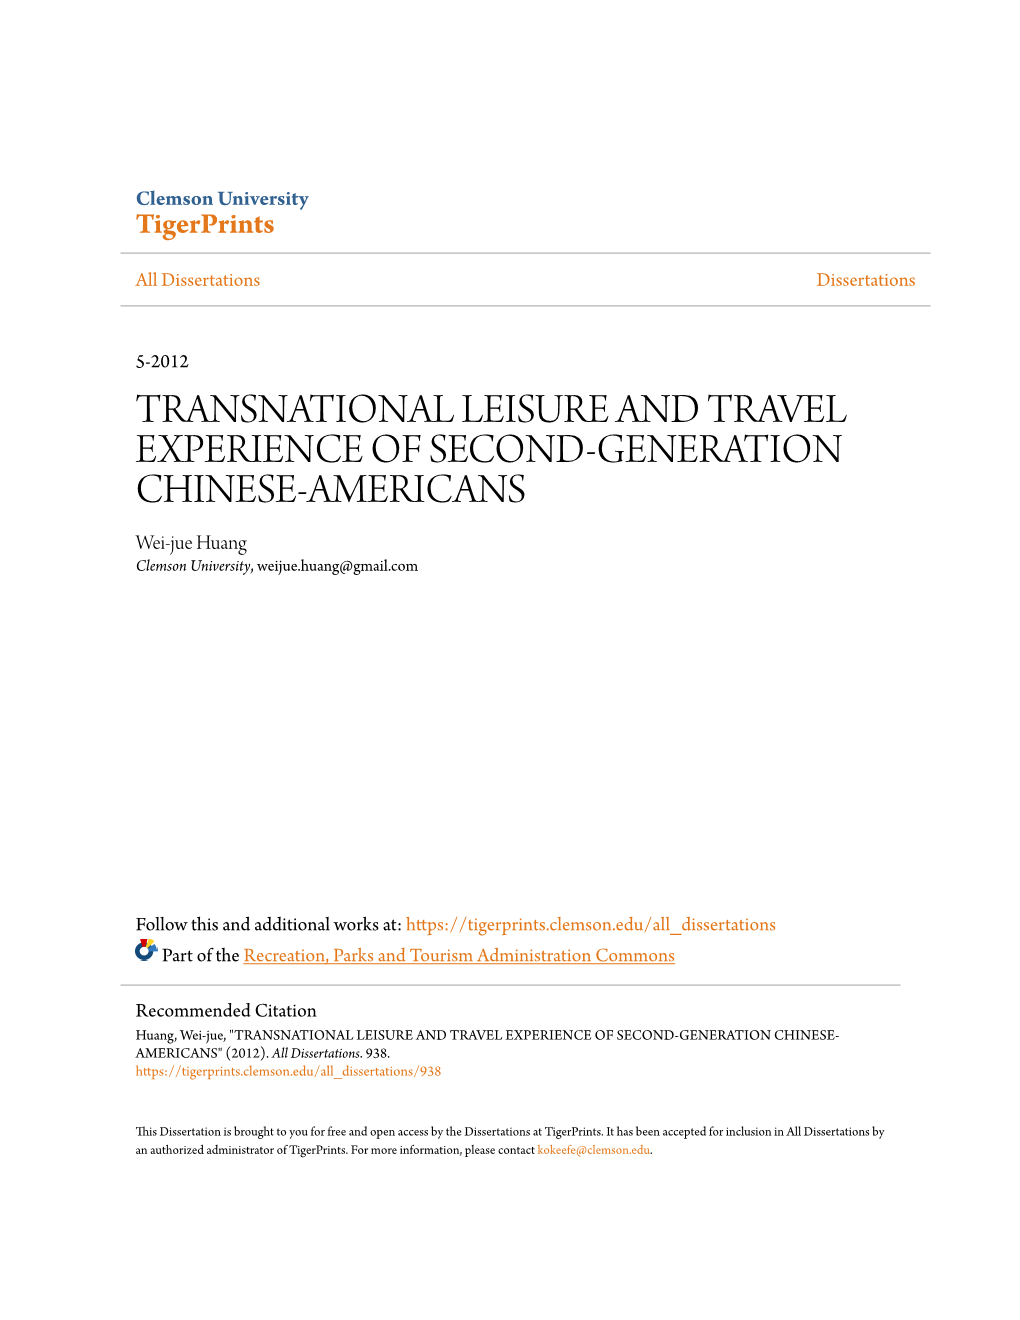 TRANSNATIONAL LEISURE and TRAVEL EXPERIENCE of SECOND-GENERATION CHINESE-AMERICANS Wei-Jue Huang Clemson University, Weijue.Huang@Gmail.Com